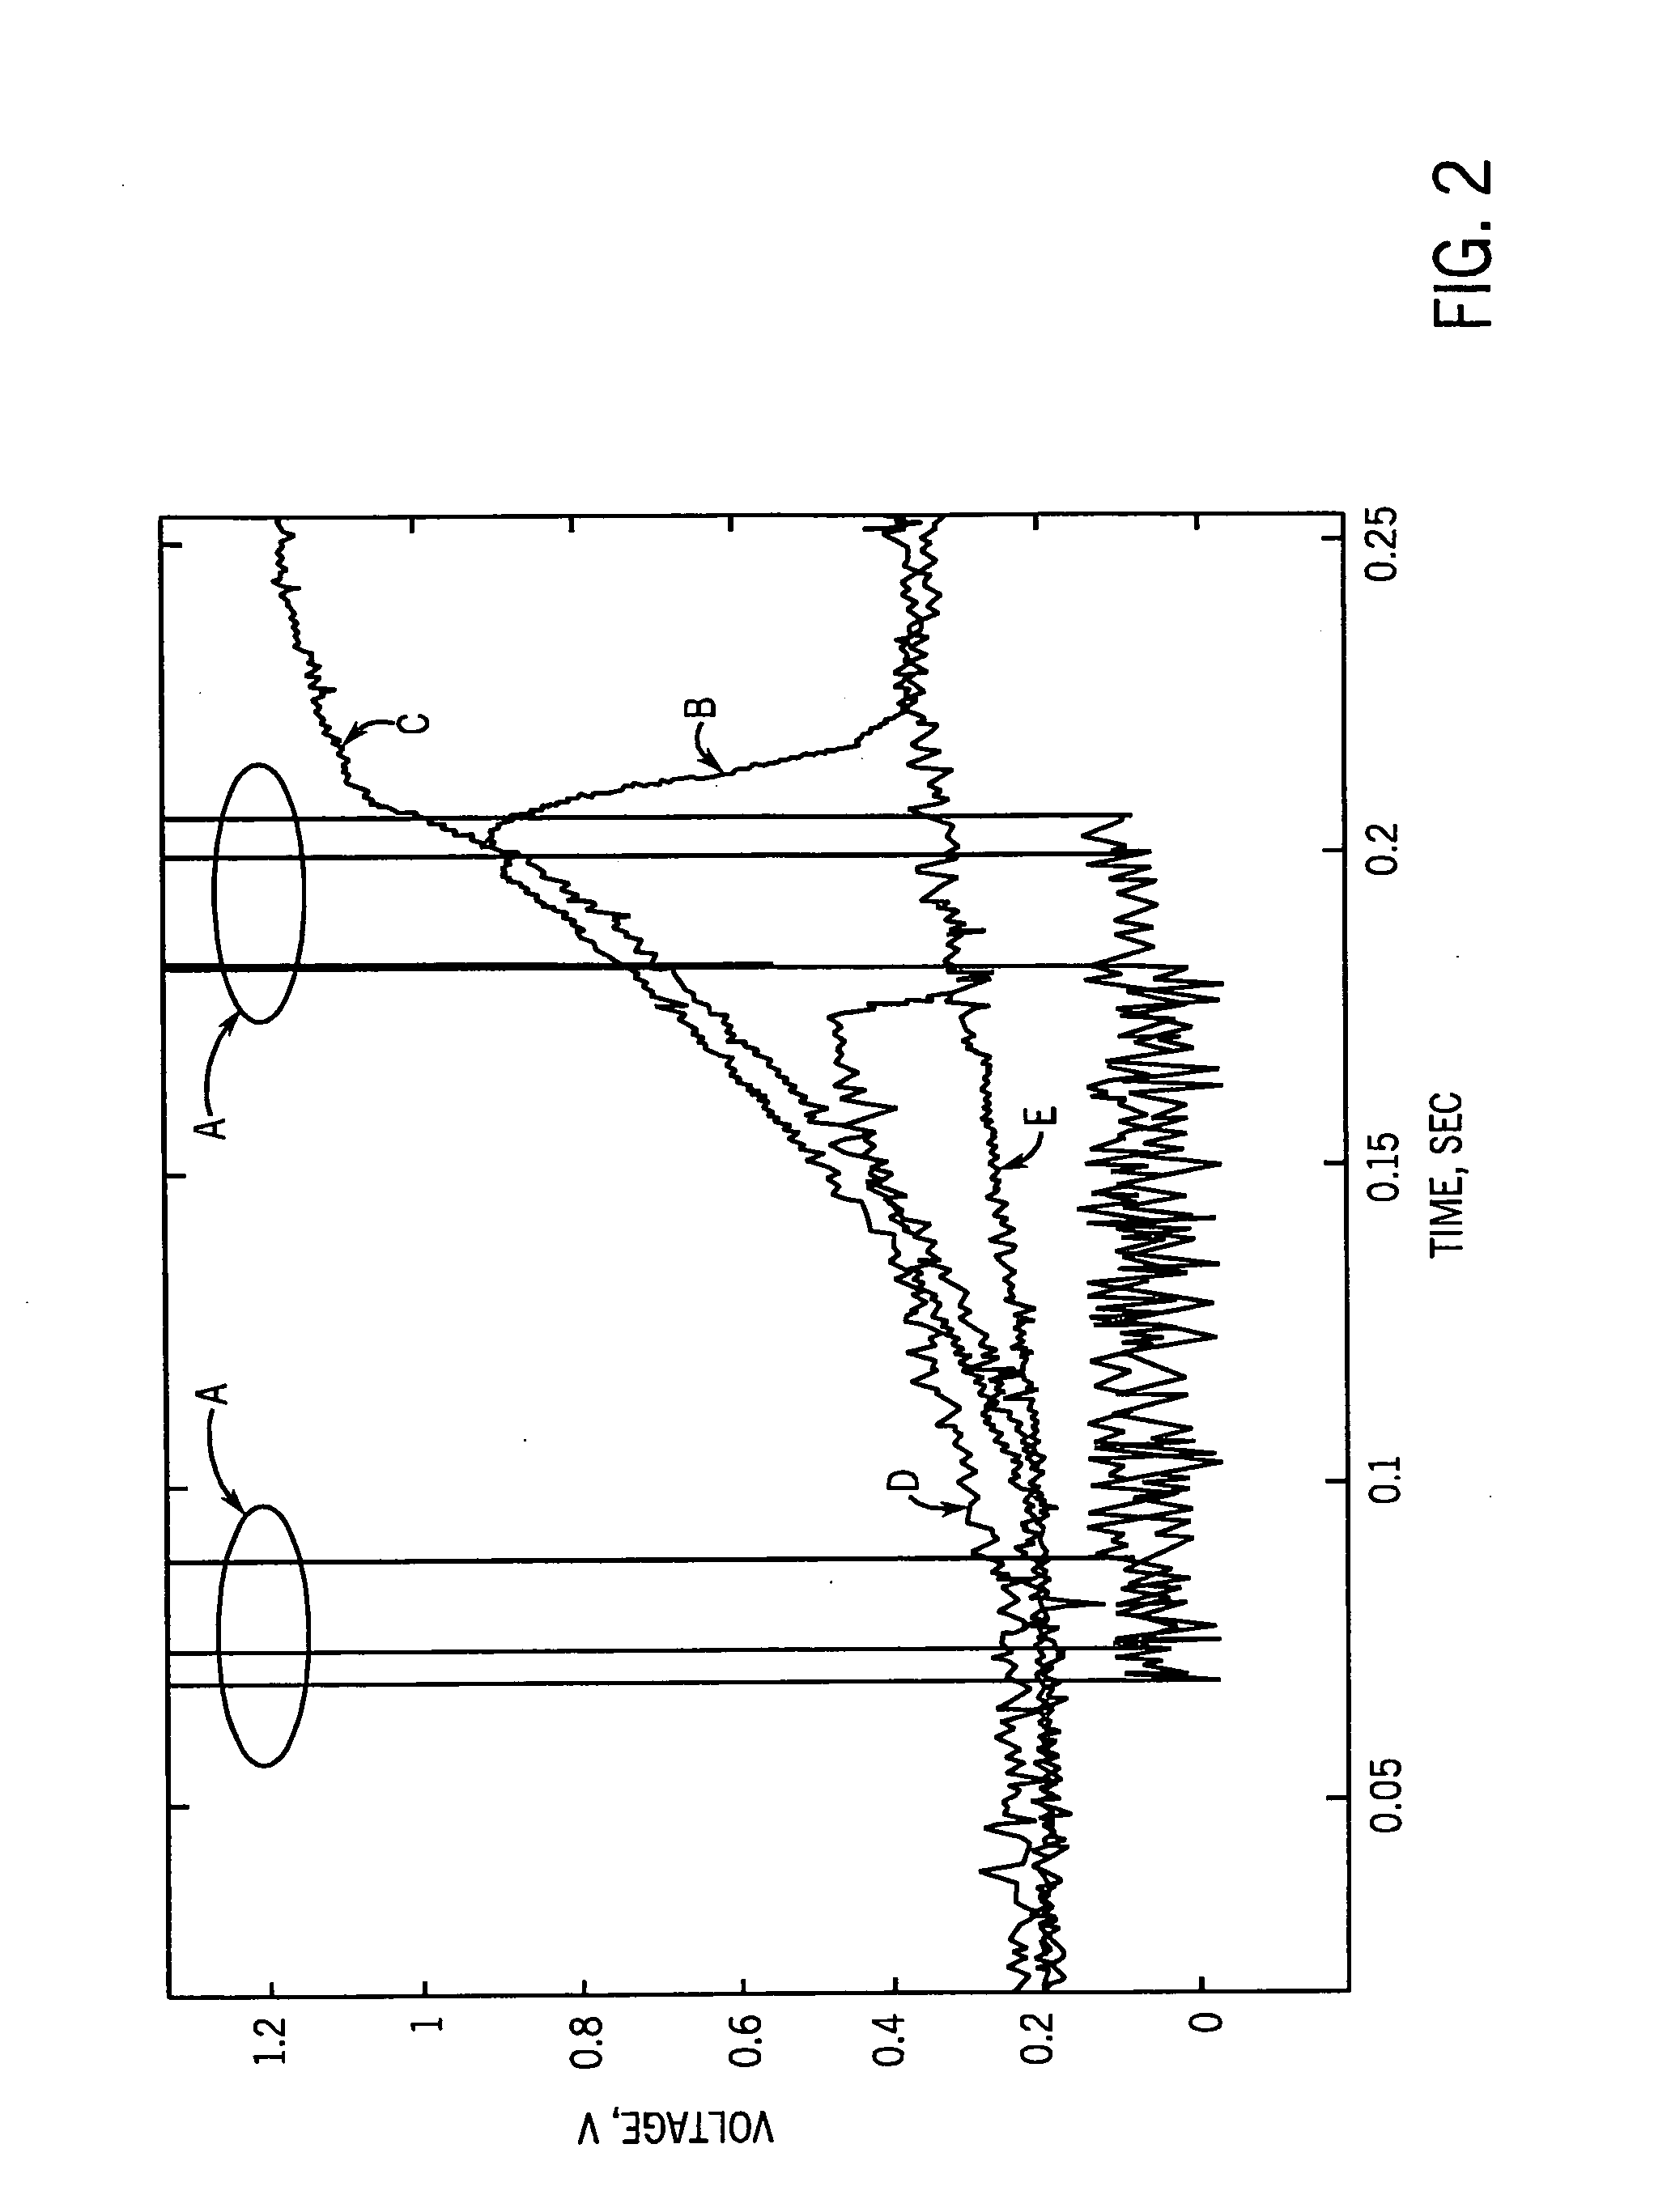 Method for discriminating between operating conditions in medical pump